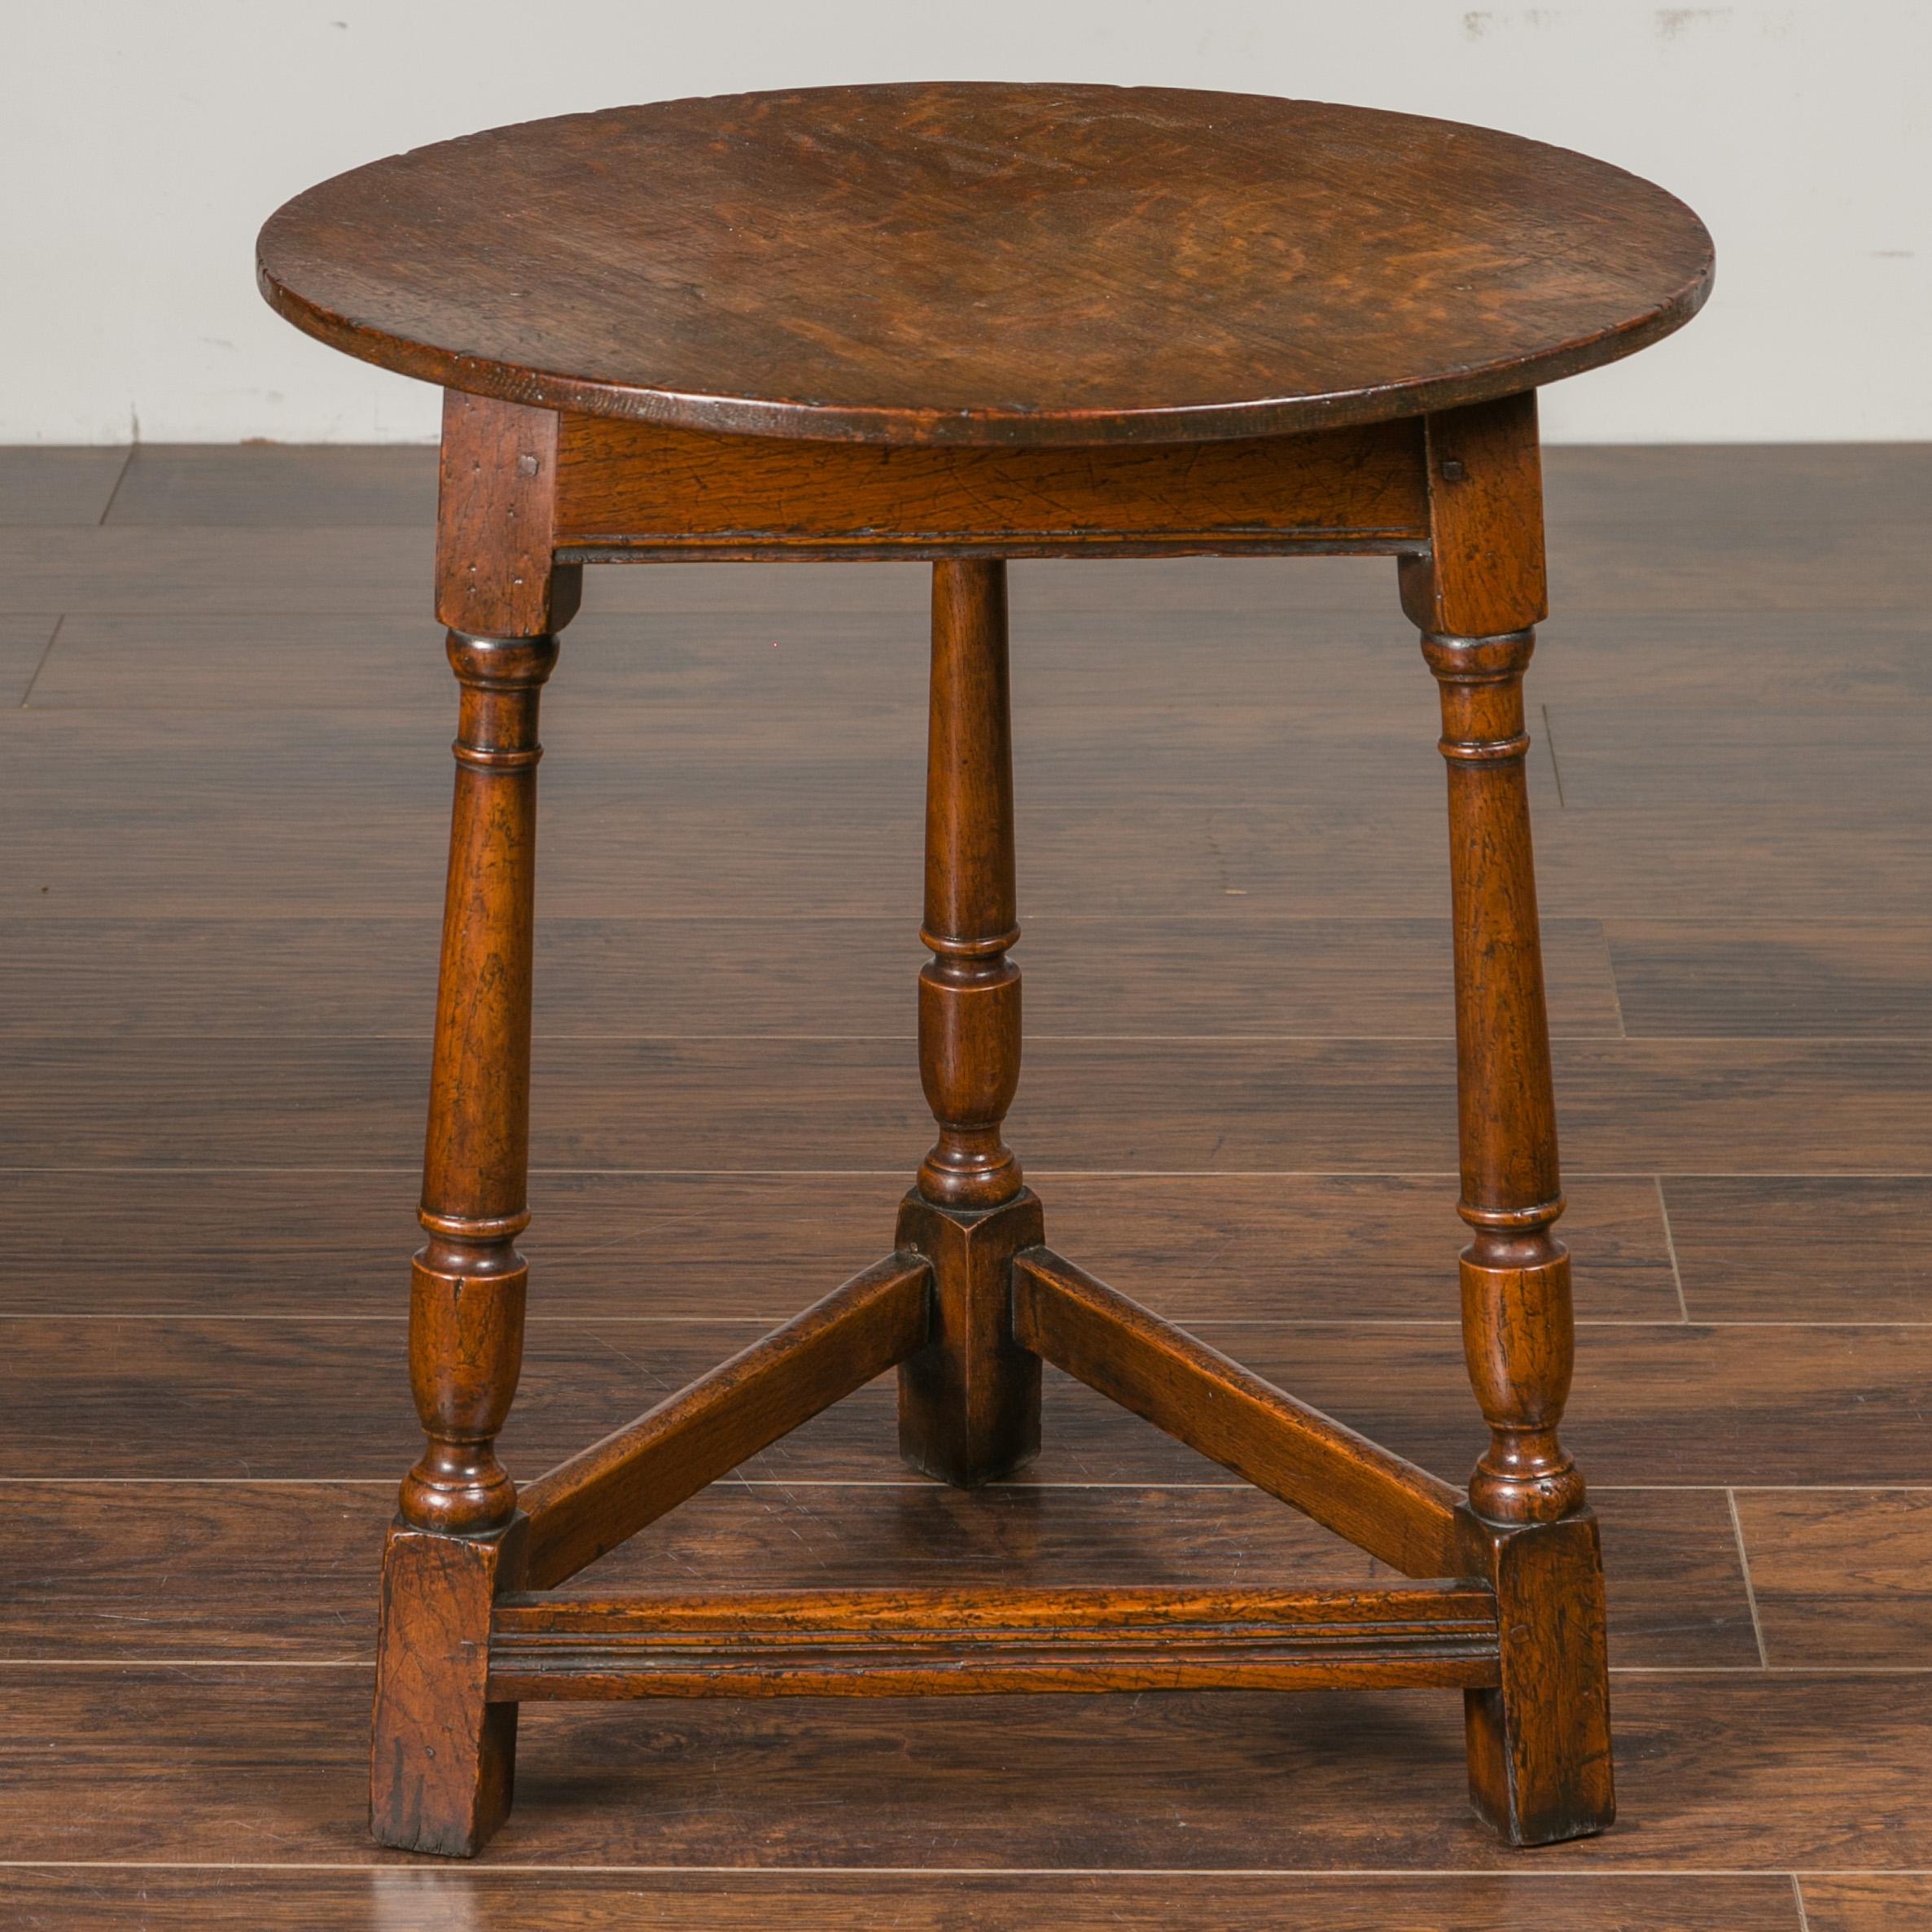 English 1840s Oak Cricket Table with Circular Top, Turned Legs and Stretchers 5